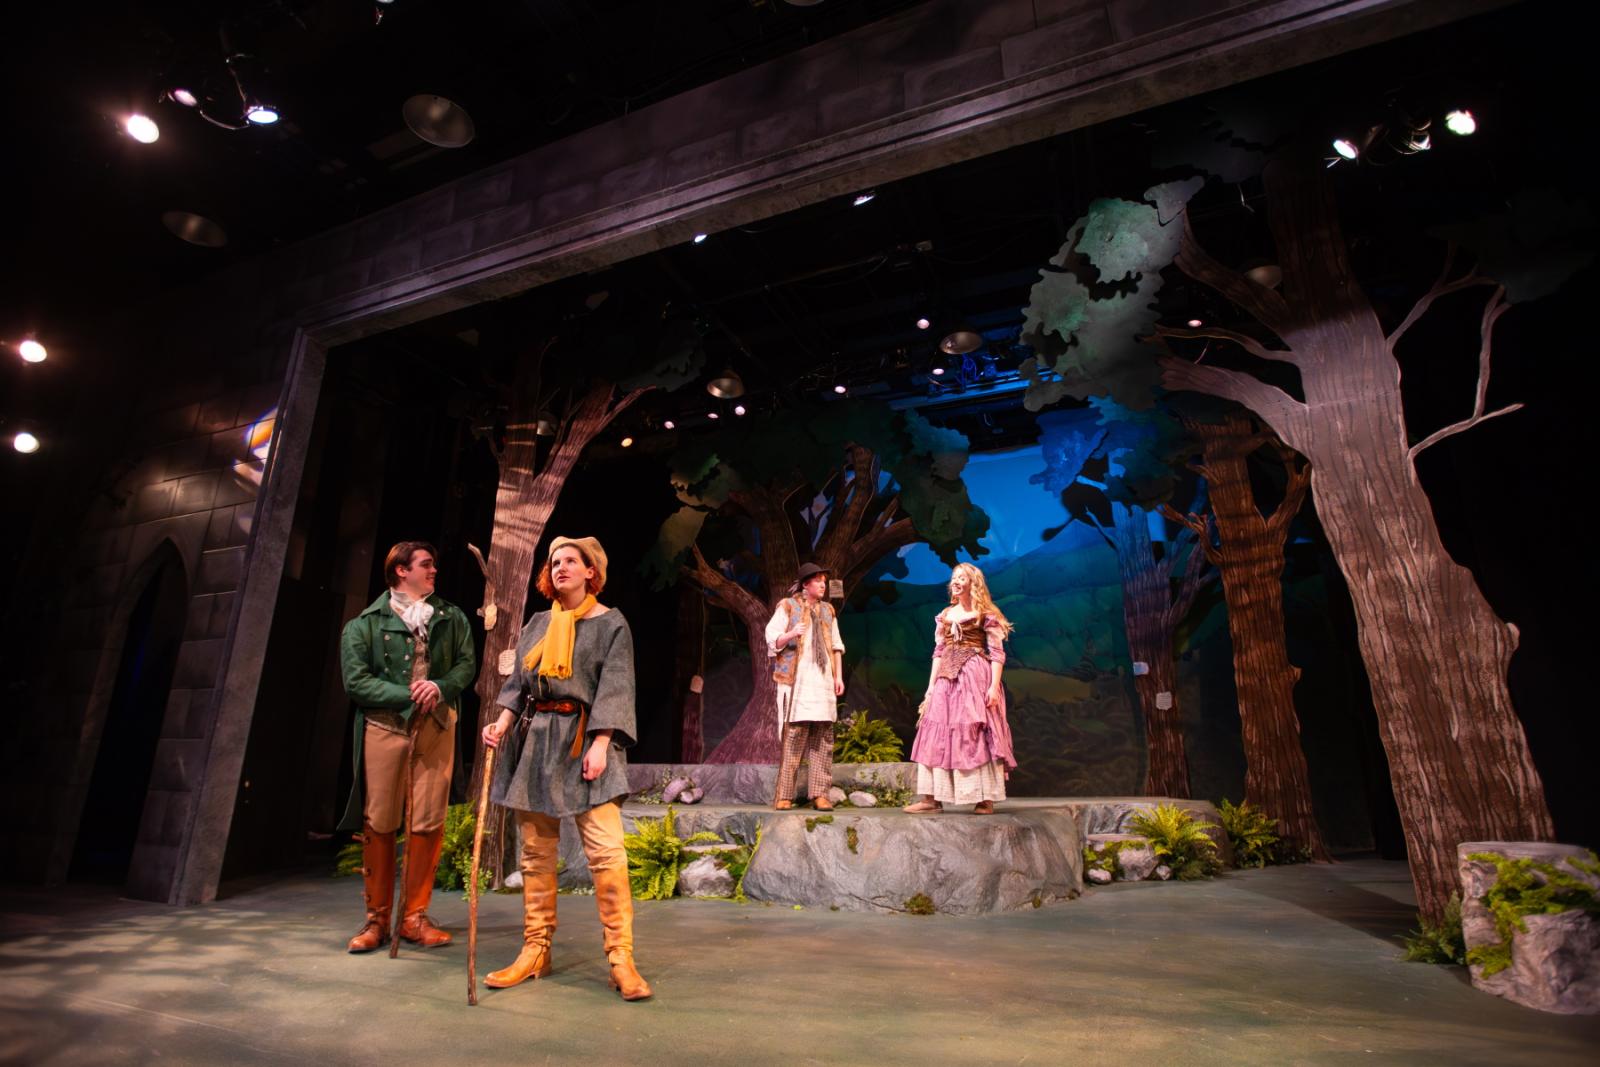 The cast rehearses for "As You Like It" in Cloak Theater.